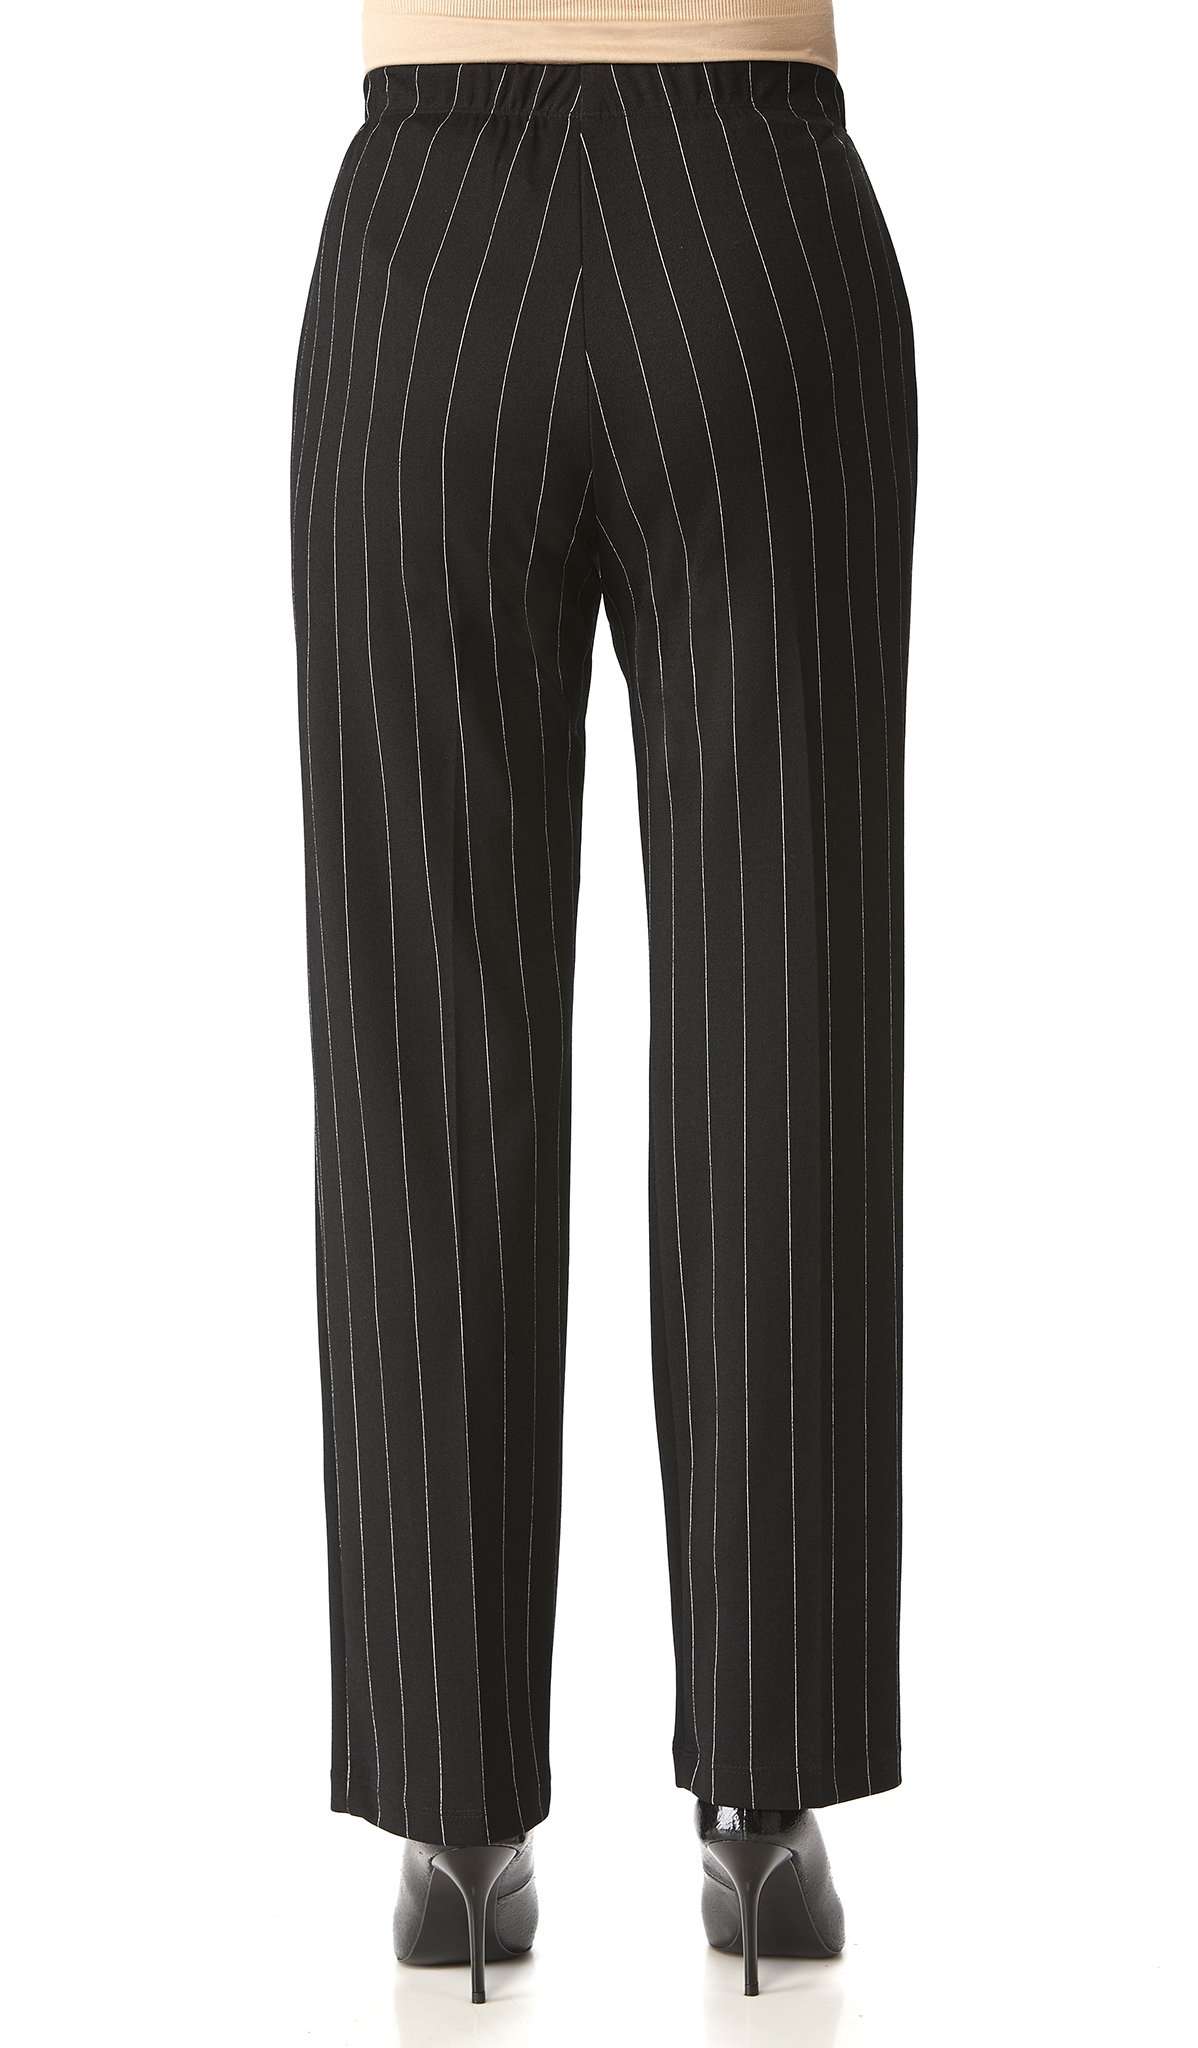 Women's Pants On Sale Black Pinstripe Quality Stretch Pant Pull On Design  Made in Canada